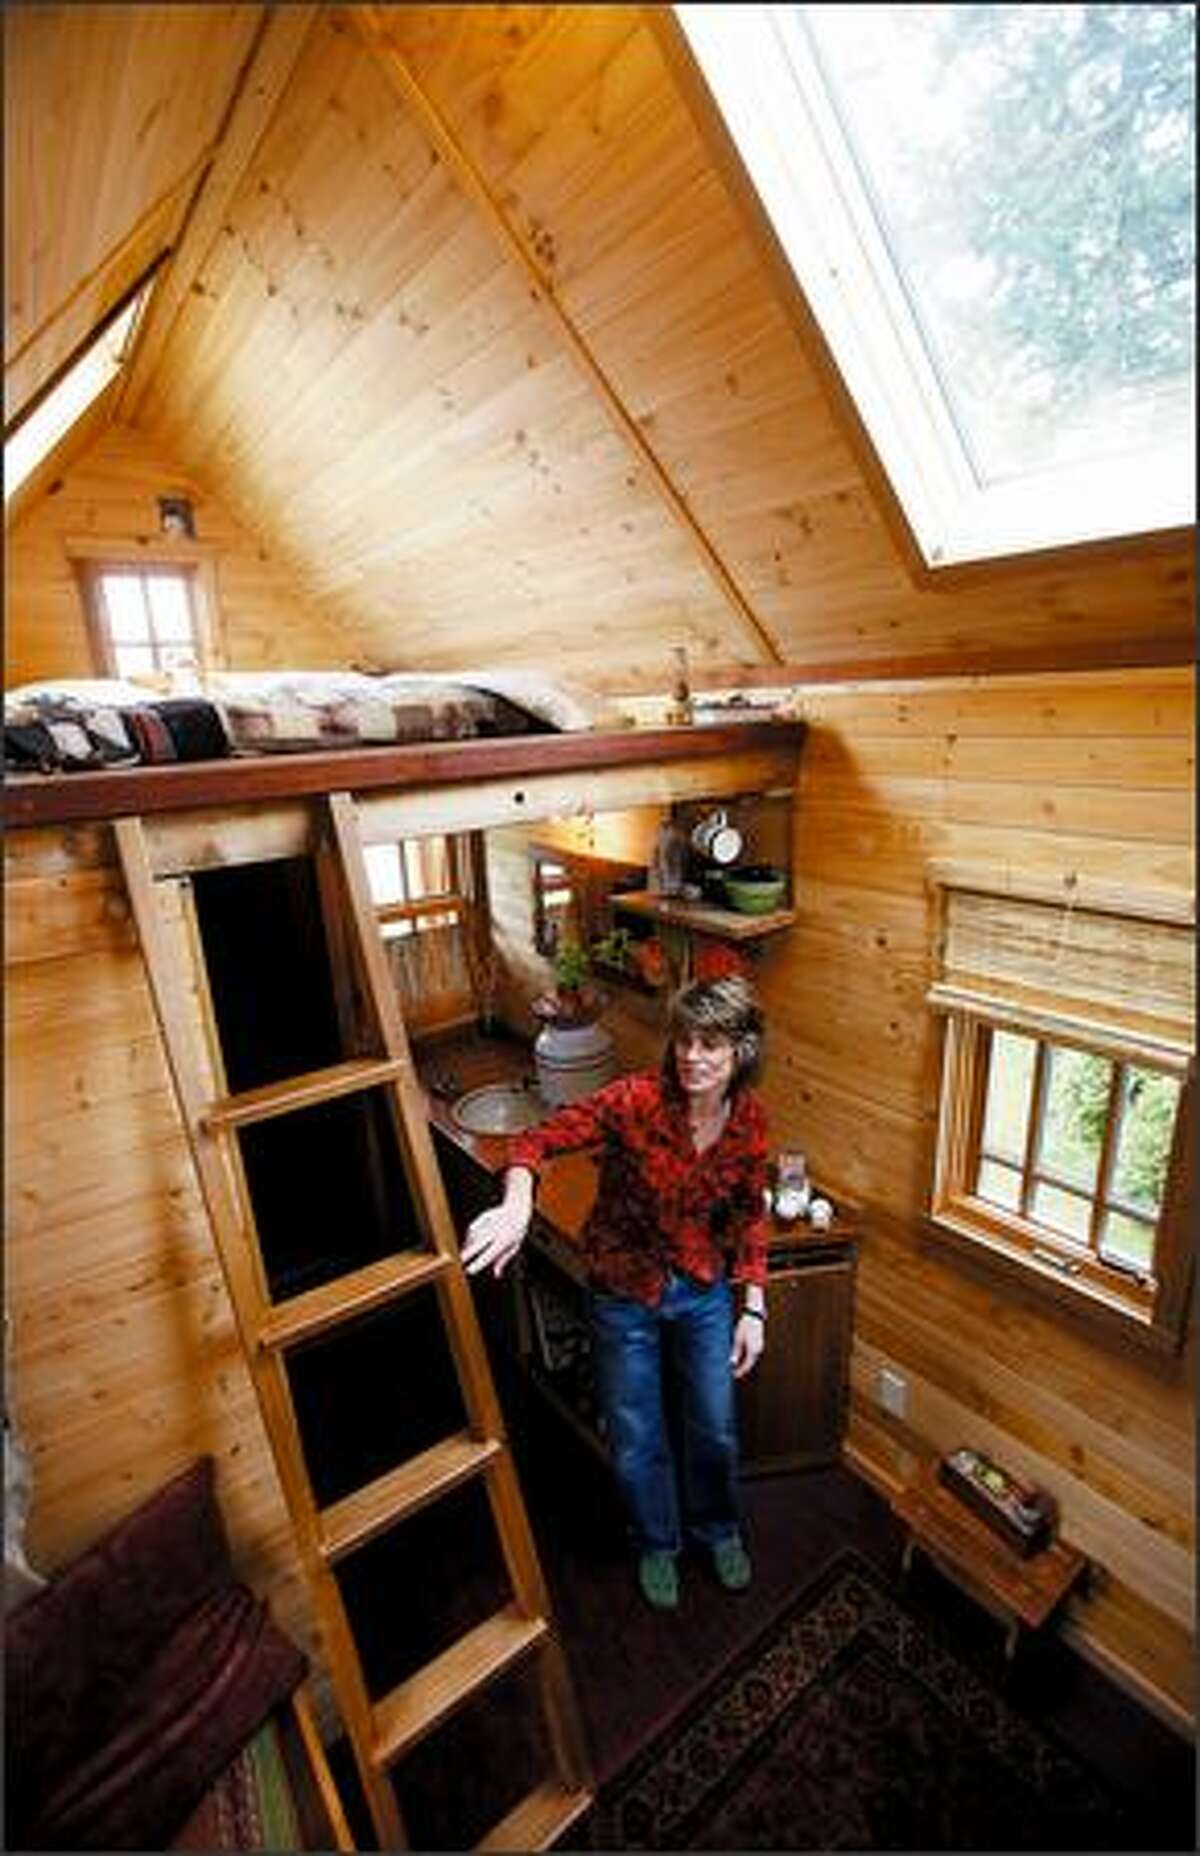 Dee Williams lives in a 7-by-12-foot Tumbleweed Tiny House in Olympia that was built for $10,000, including solar panels, ecofriendly denim insulation, high-quality wood windows and a trailer.